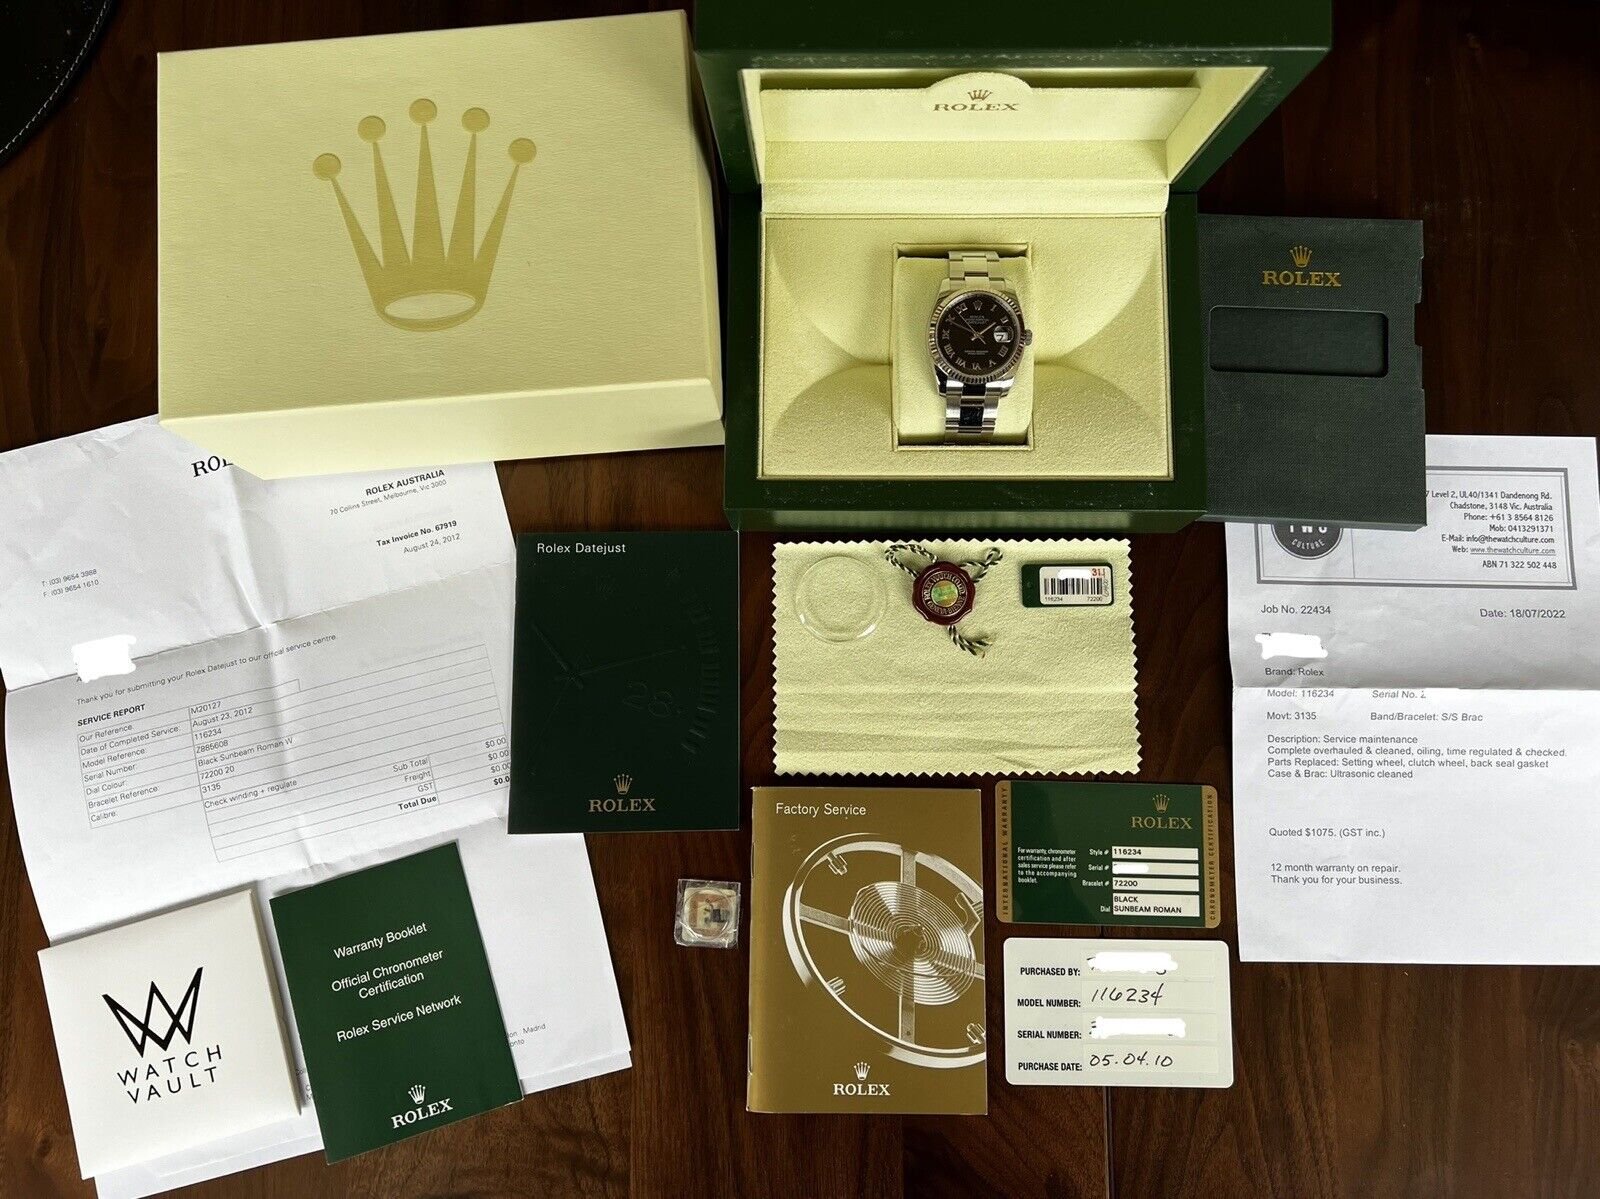 Rolex Datejust 36mm 116234 Sunray Dial Steel/Gold - Box and papers - 2010